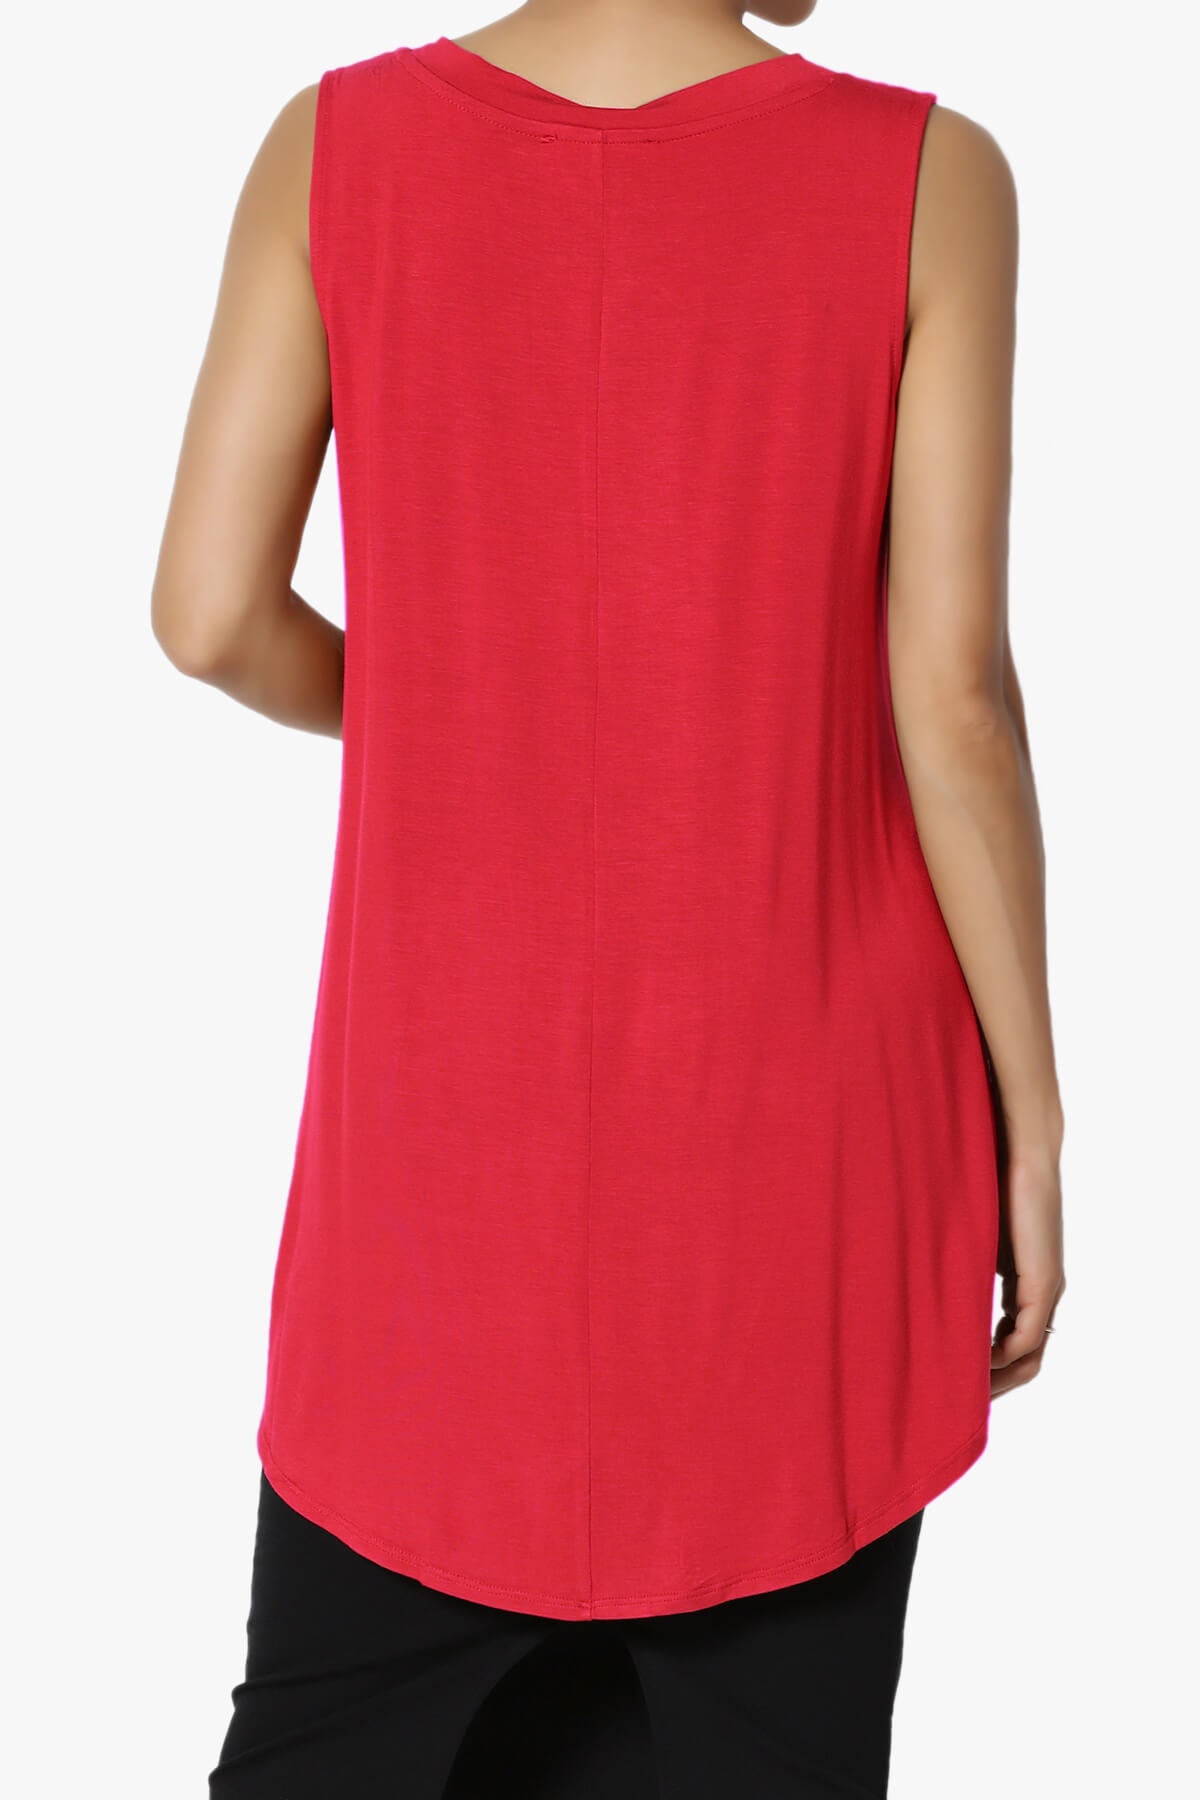 Myles Sleeveless V-Neck Luxe Jersey Top RED_2